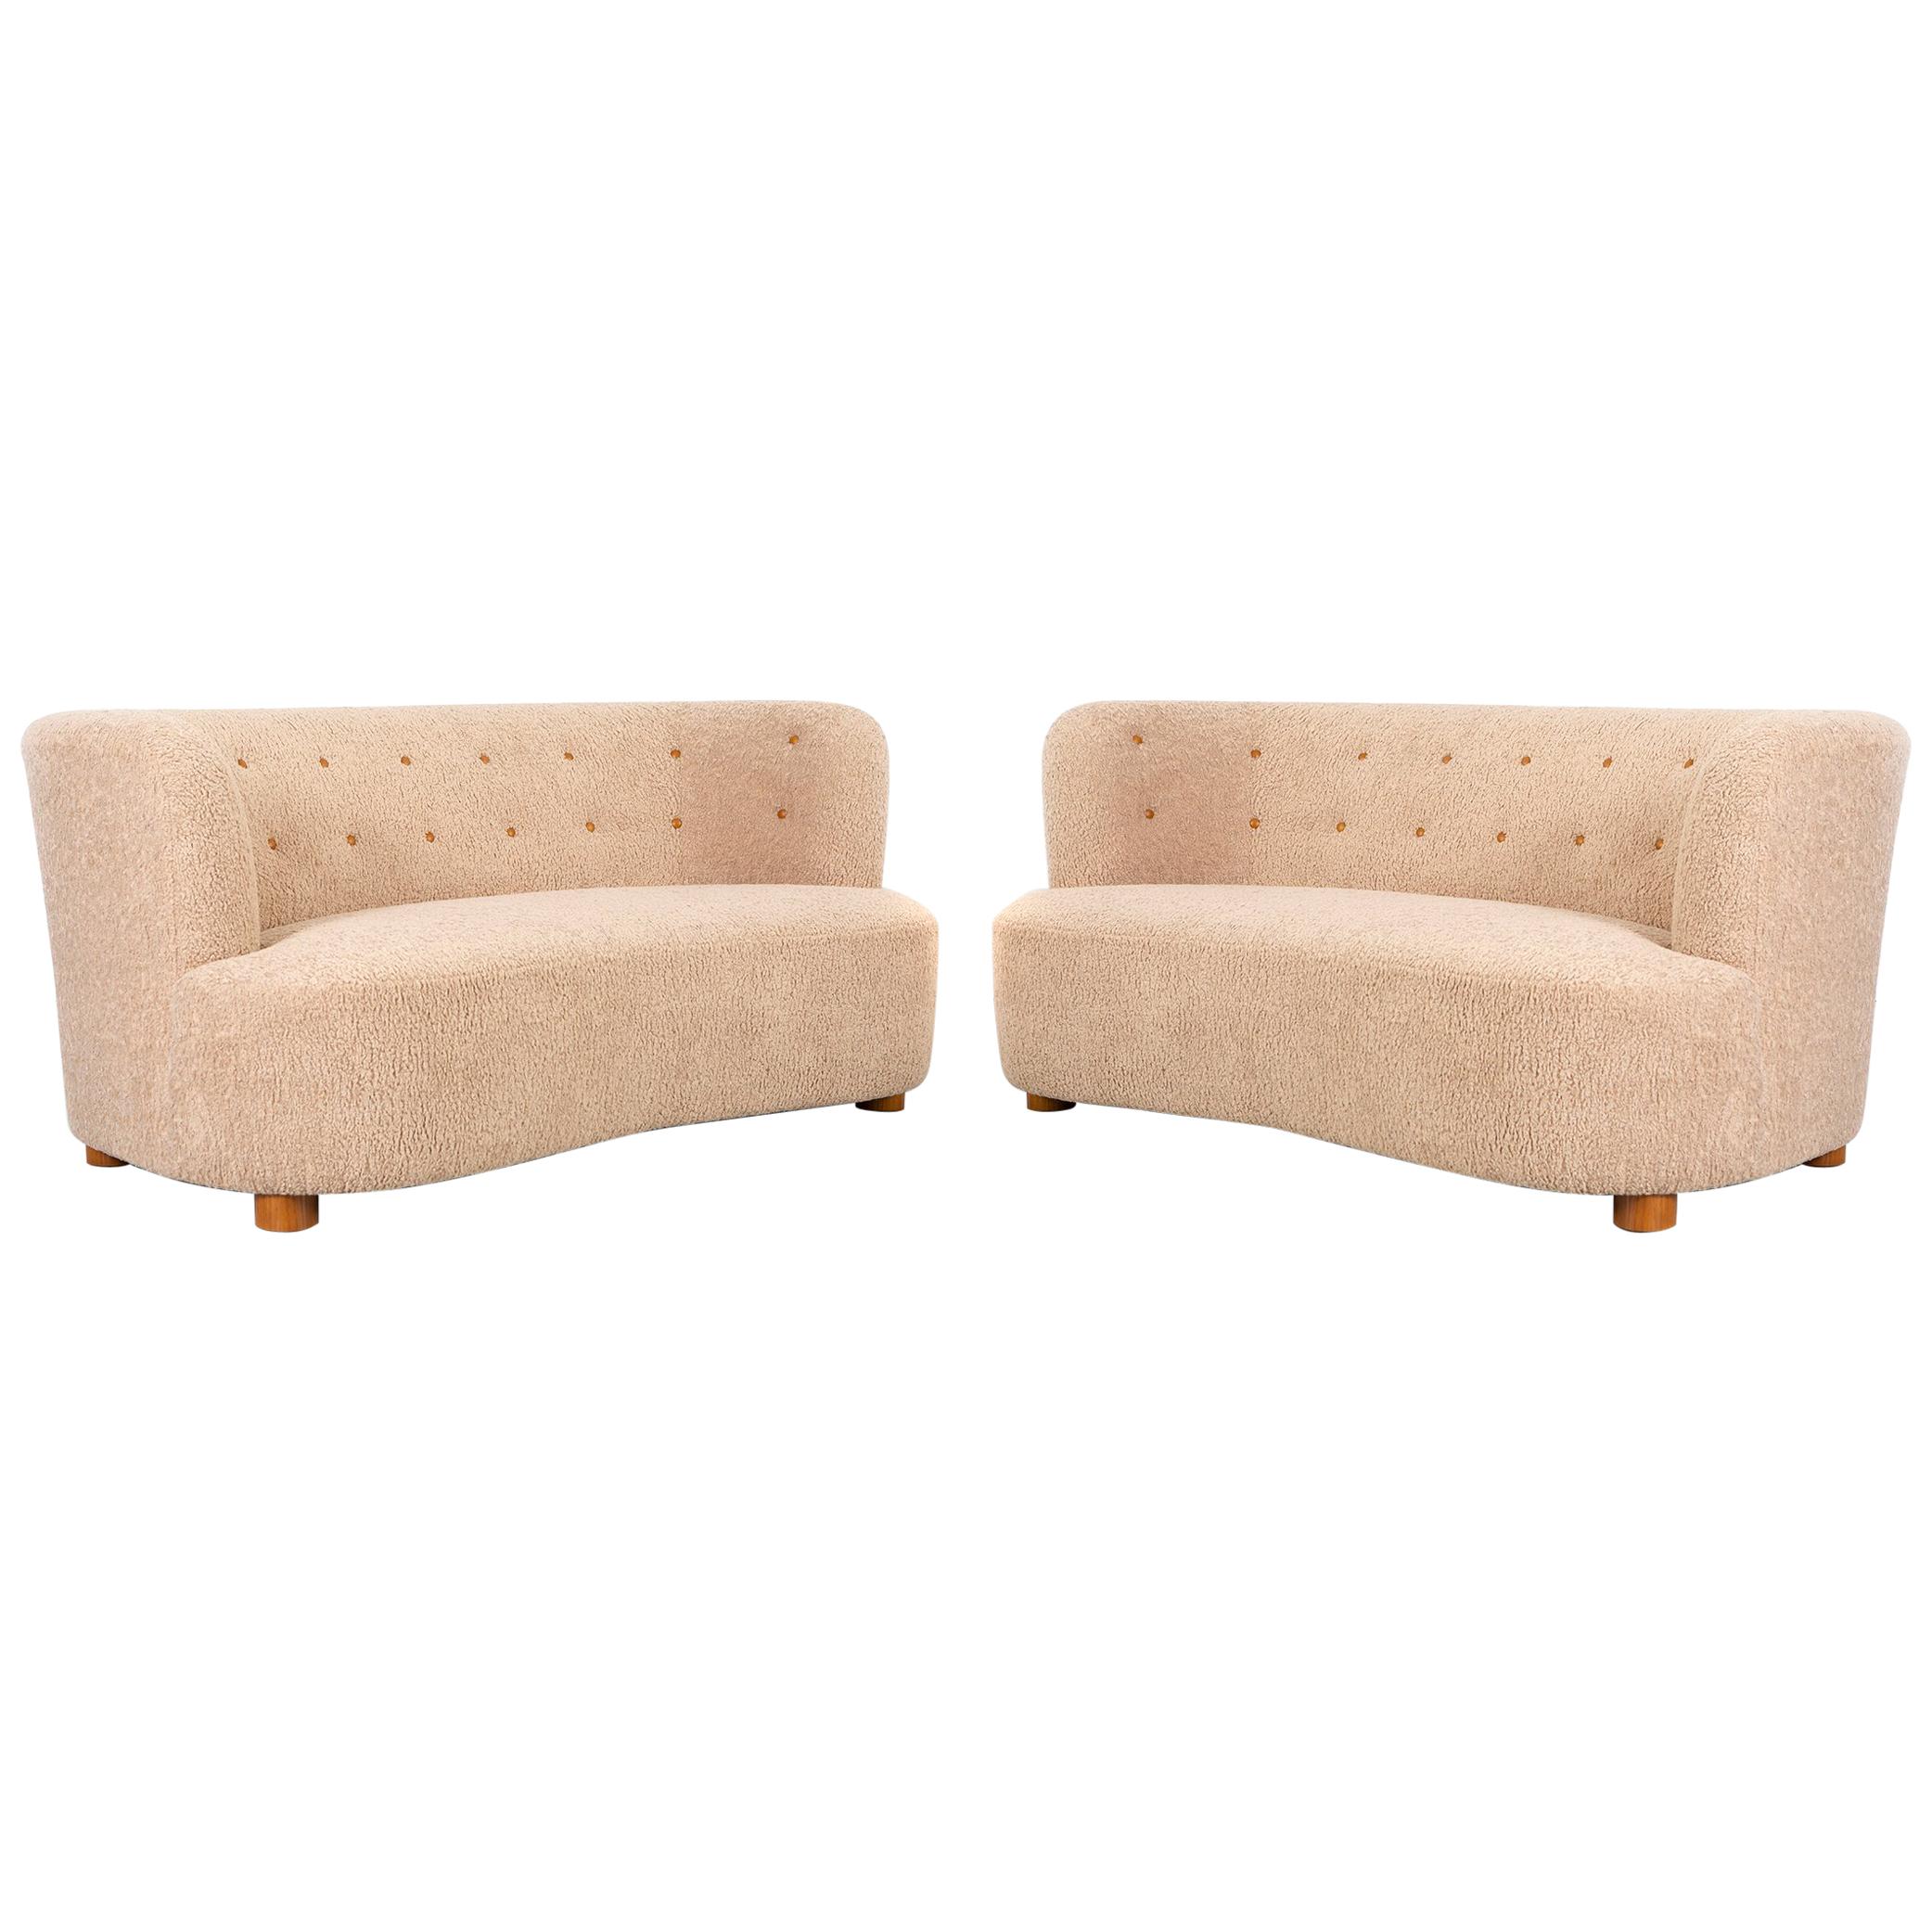 Set of two settees 

Denmark, circa 1960s

Freshly reupholstered in synthetic blend fabric with birch feet

Measures: 30 ?” H x 69 ½” W x 40” D x seat 18” H.

.